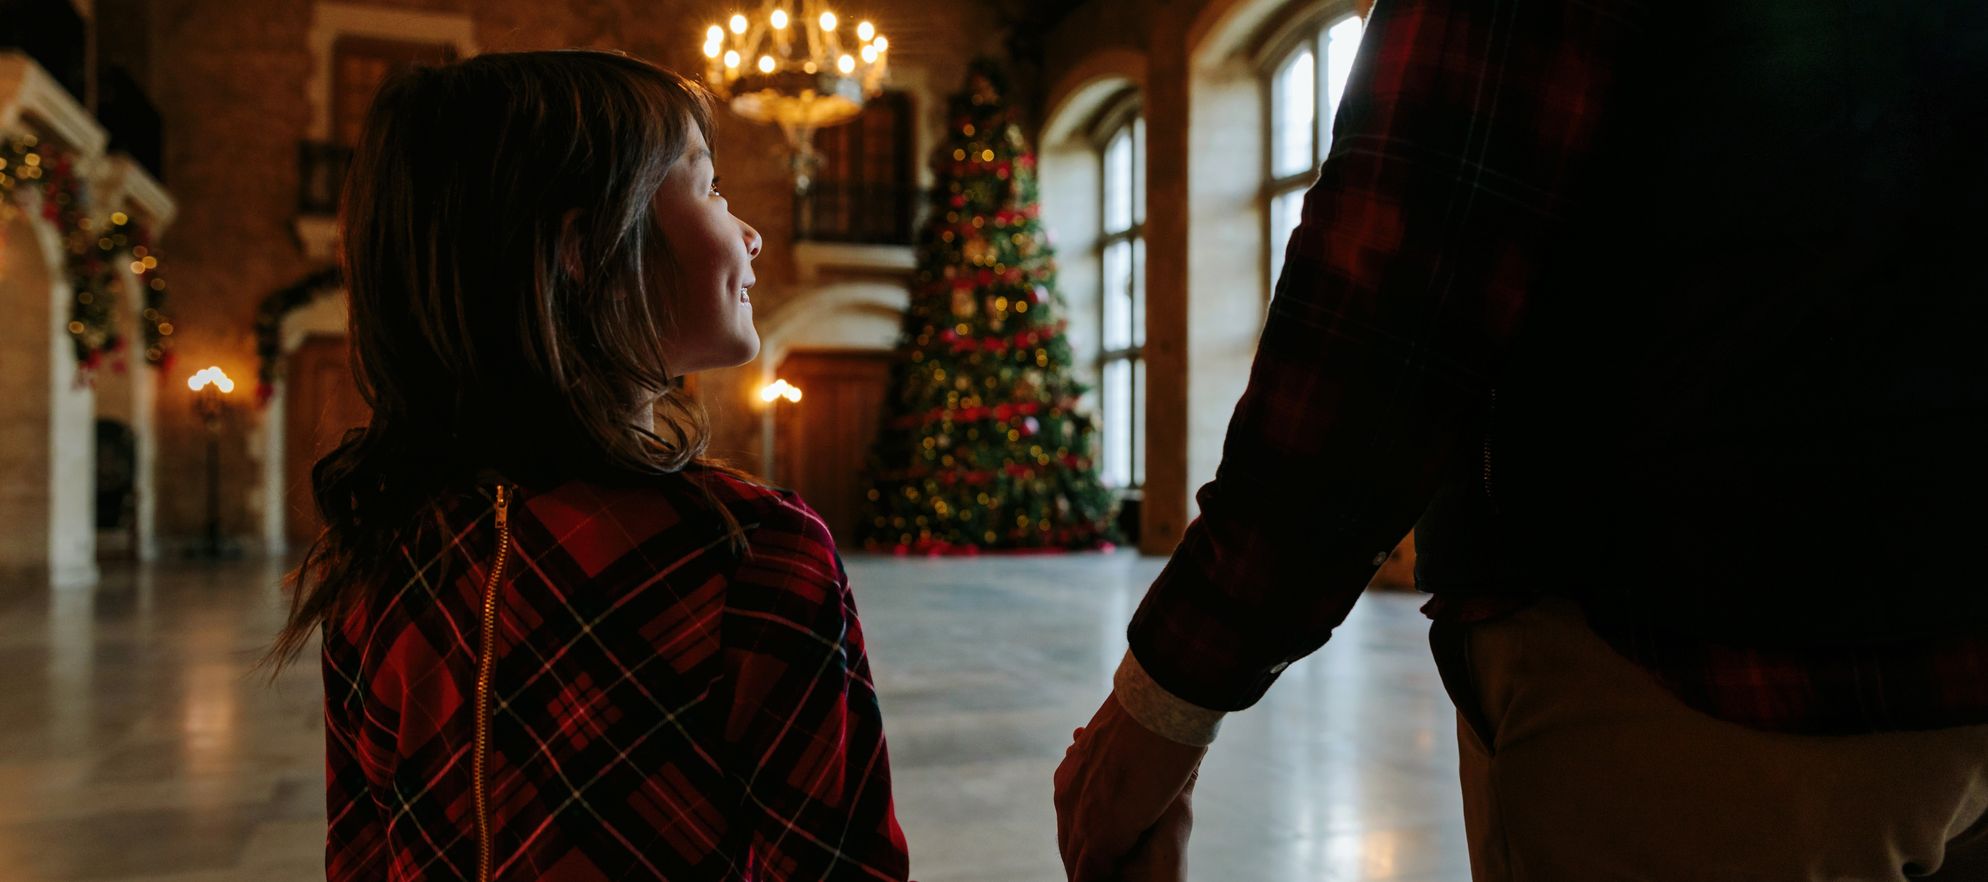 Journey to the North Pole at Fairmont Banff Springs